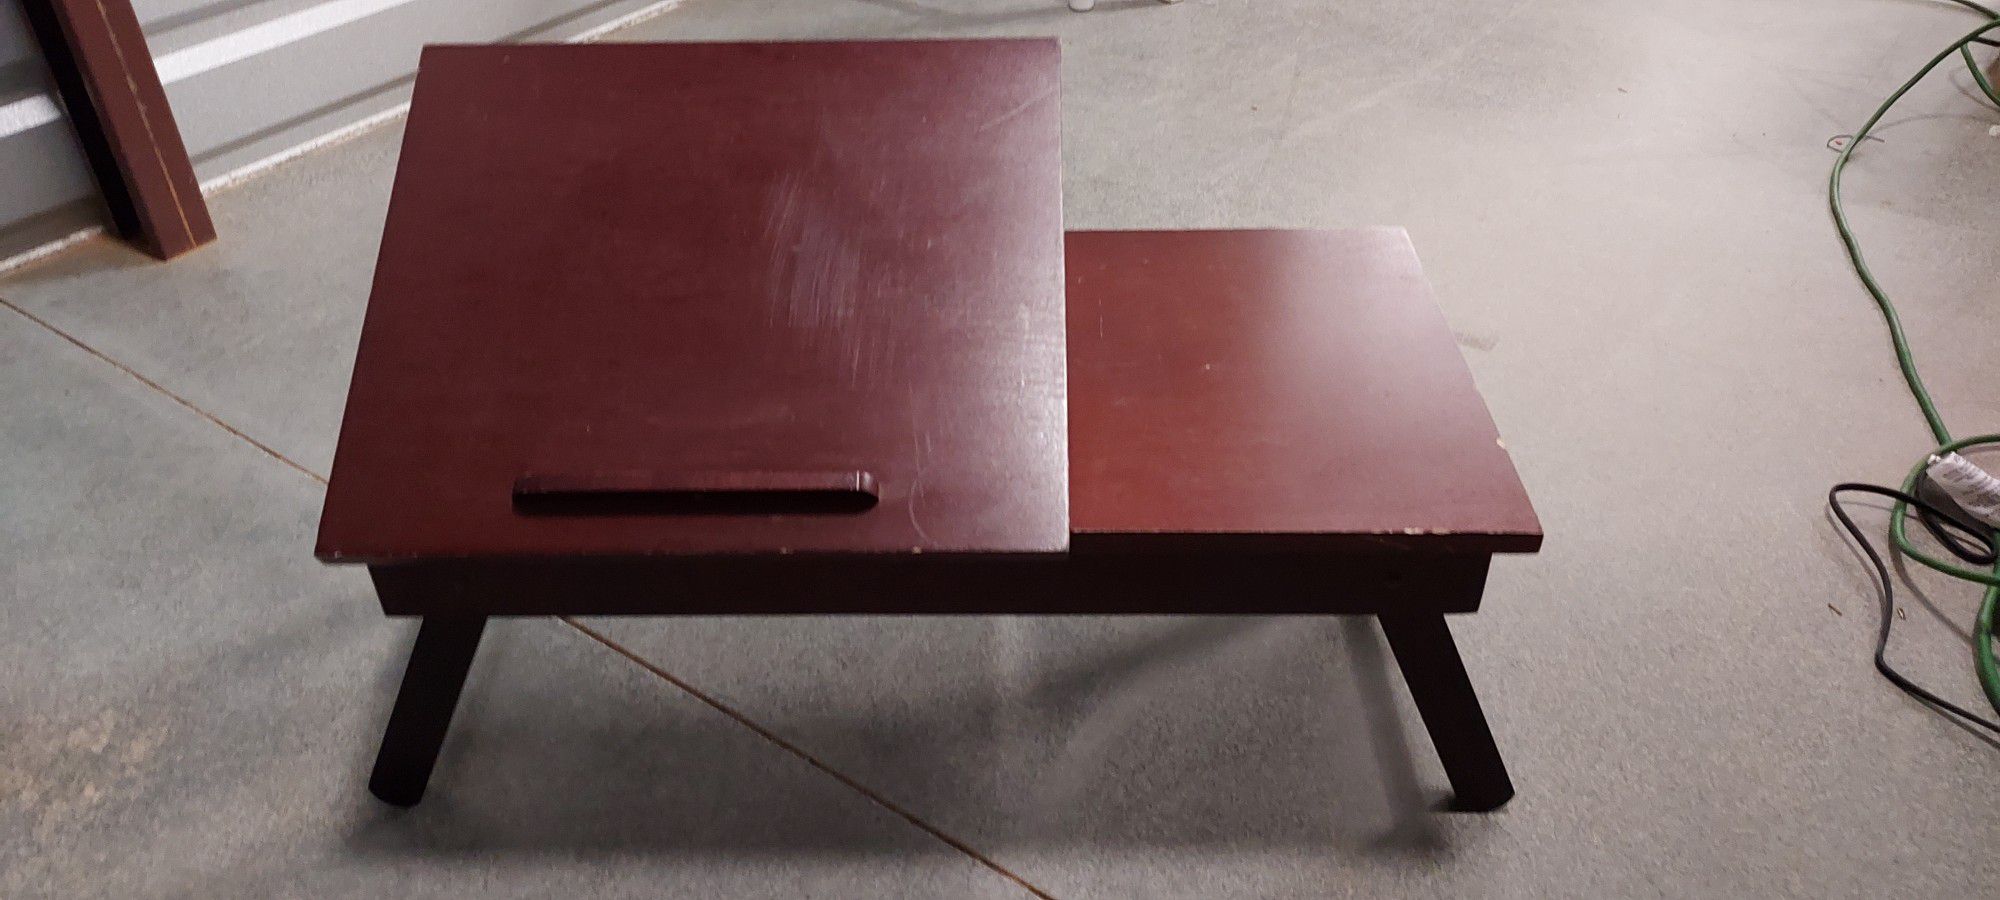 Adjustable Lap Table With Storage Drawer